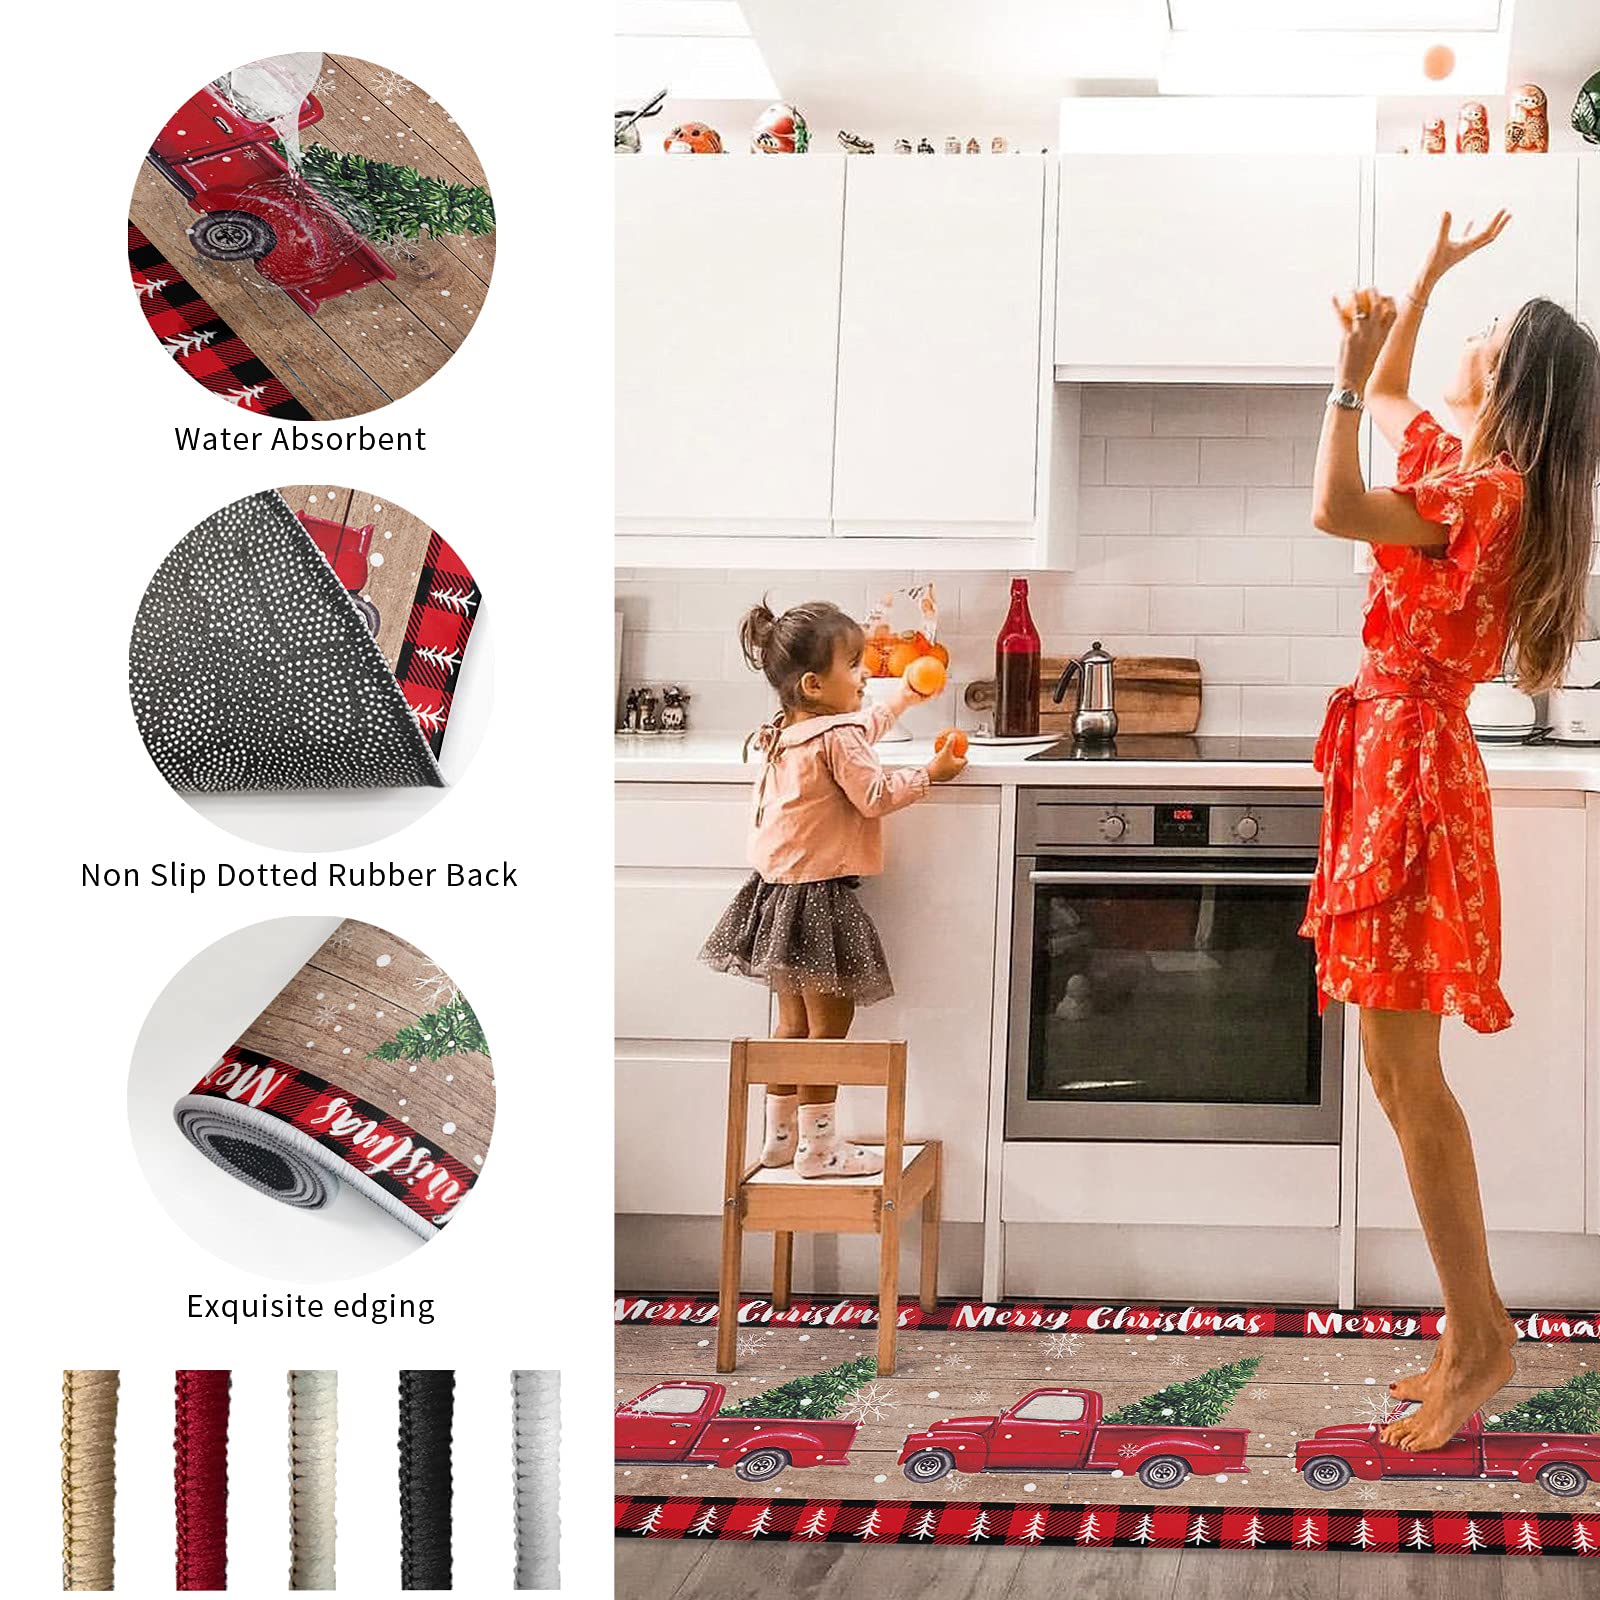 LooPoP Kitchen Rugs and Mats Sets of 2 Merry Christmas Non-Slip Rubber Backing Area Rugs Washable Runner Carpets for Floor, Kitchen Rustic Red Truck with Xmas Tree Snowflakes 15.7x23.6+15.7x47.2inch